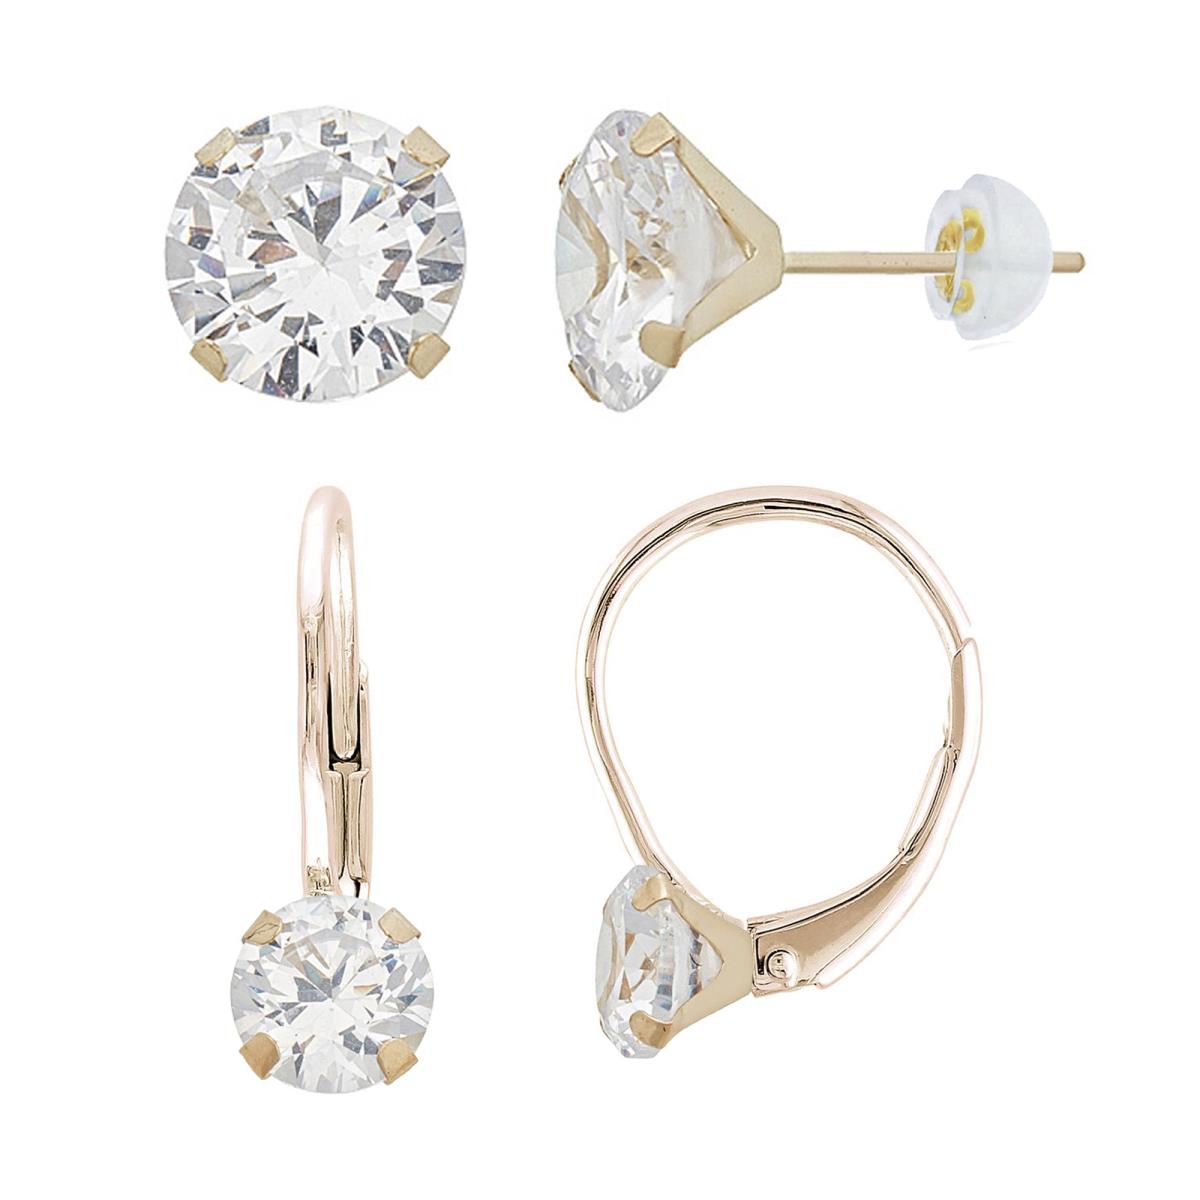 10K Yellow Gold 6mm Rd Cut Martini Leverback & 8mm Rd Solitaire Stud Earring Set 